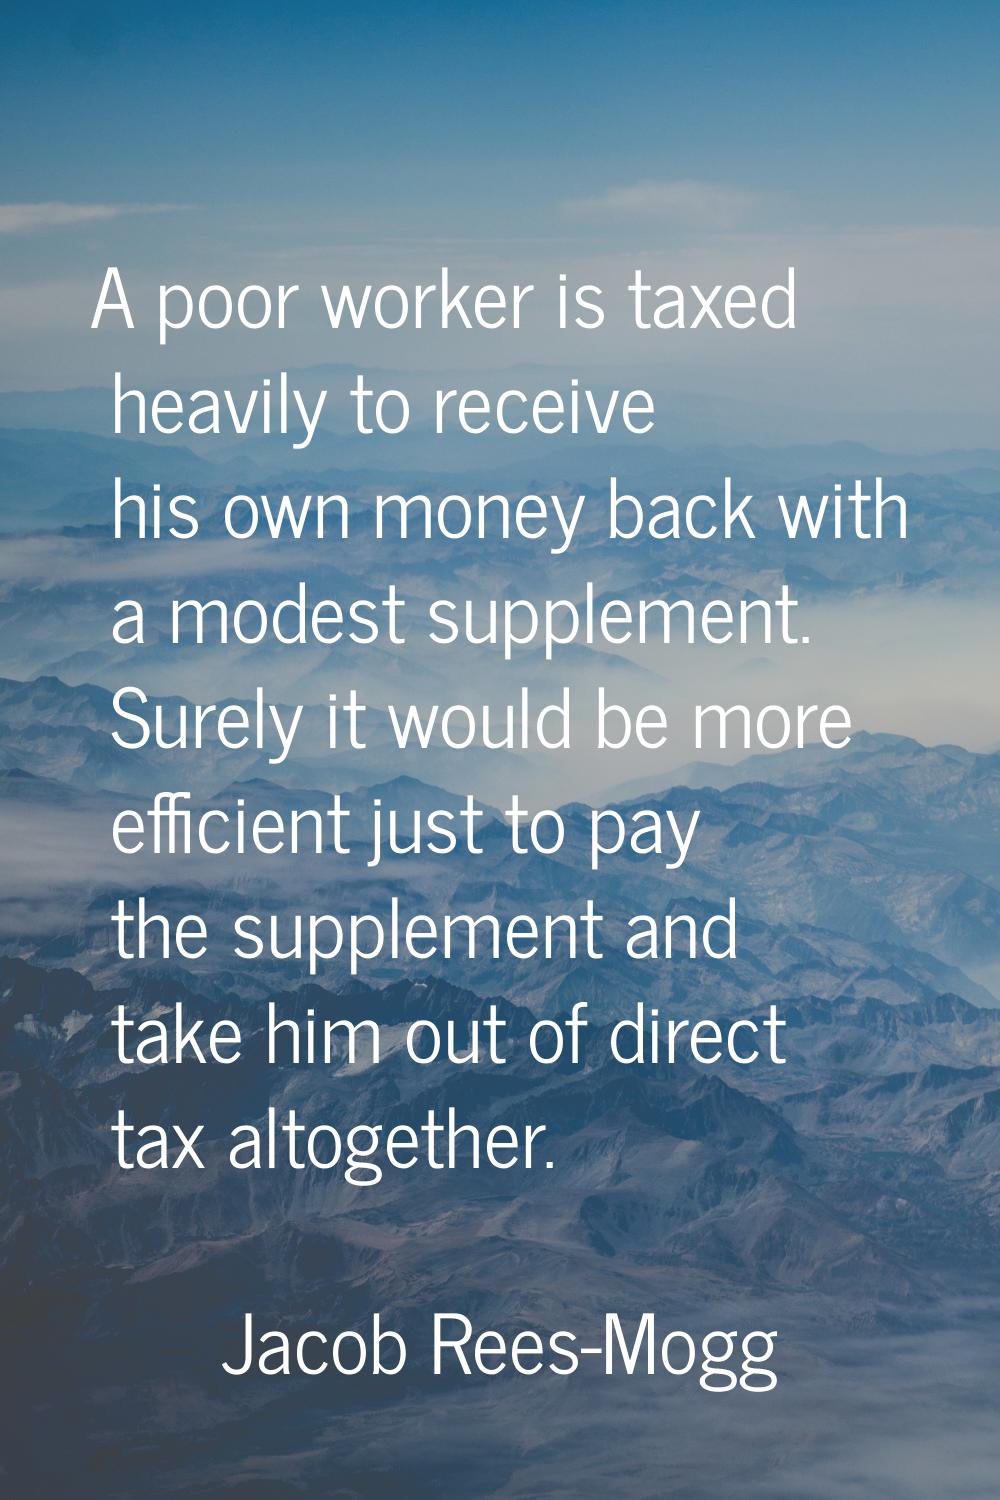 A poor worker is taxed heavily to receive his own money back with a modest supplement. Surely it wo